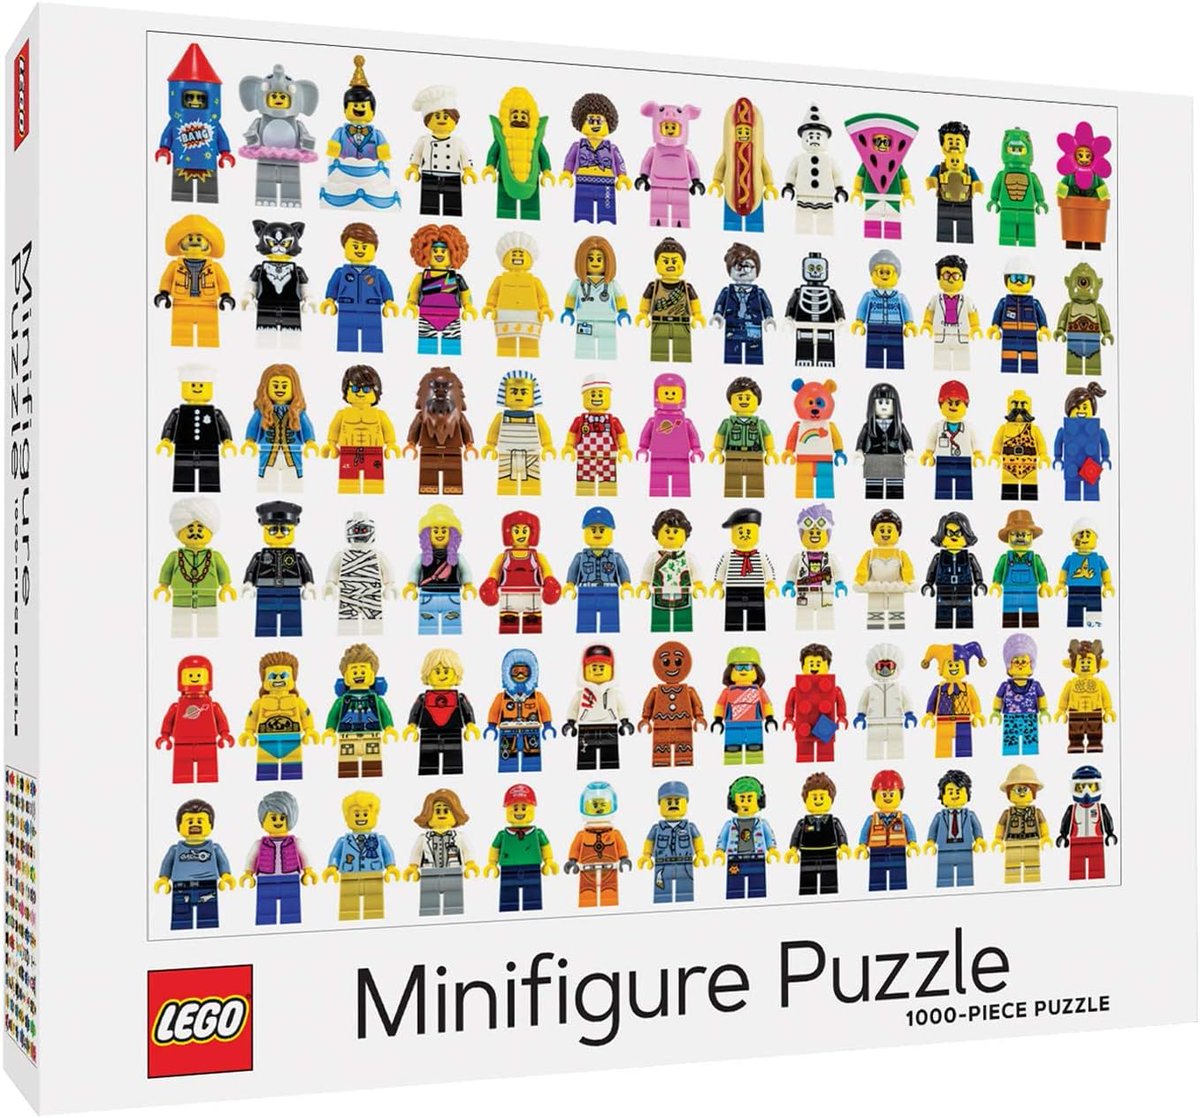 LEGO Minifigure Puzzle - Perfect for Gifting!
Grab yours now: amzn.to/3PJm16o
#ad #LegoPuzzle #Lego #puzzle #games #Christmas #birthday #giftfor